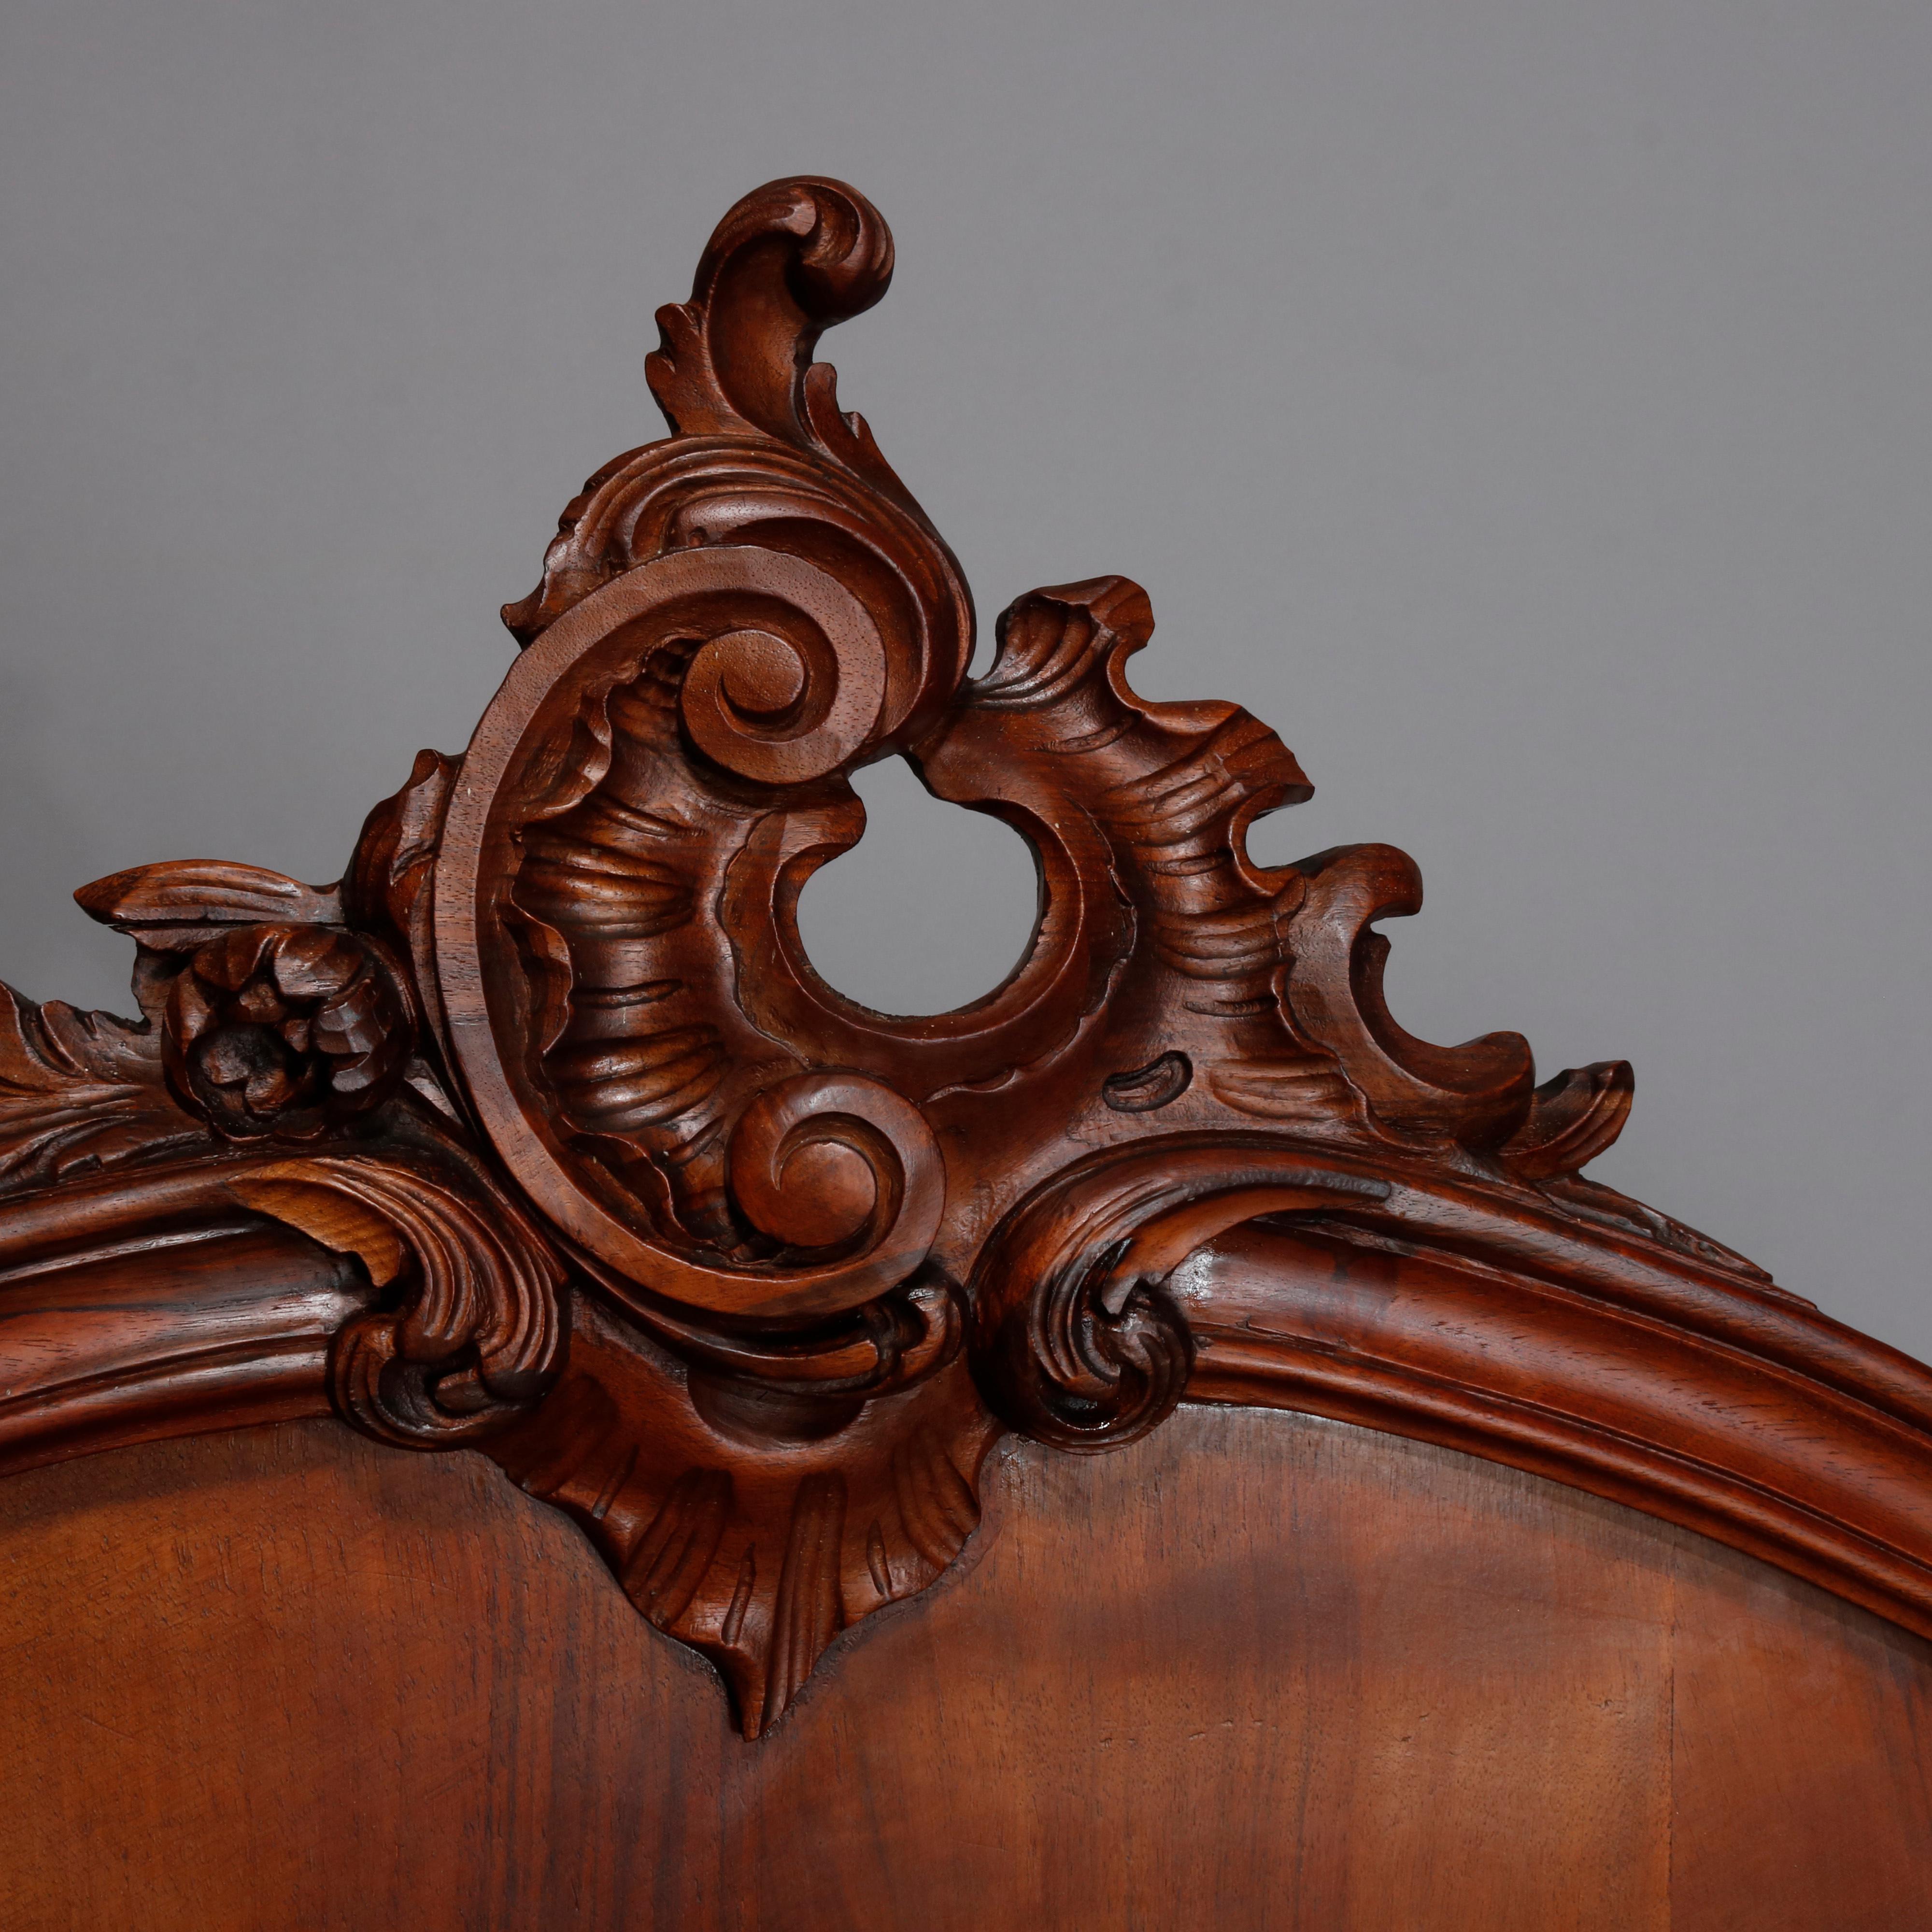 French rococo carved flame mahogany full bed frame with scroll and foliate cartouche over shaped headboard with cabriole legs having acanthus knees and scroll feet, shaped side rails, early 20th century.

Measures- Headboard- 58.5